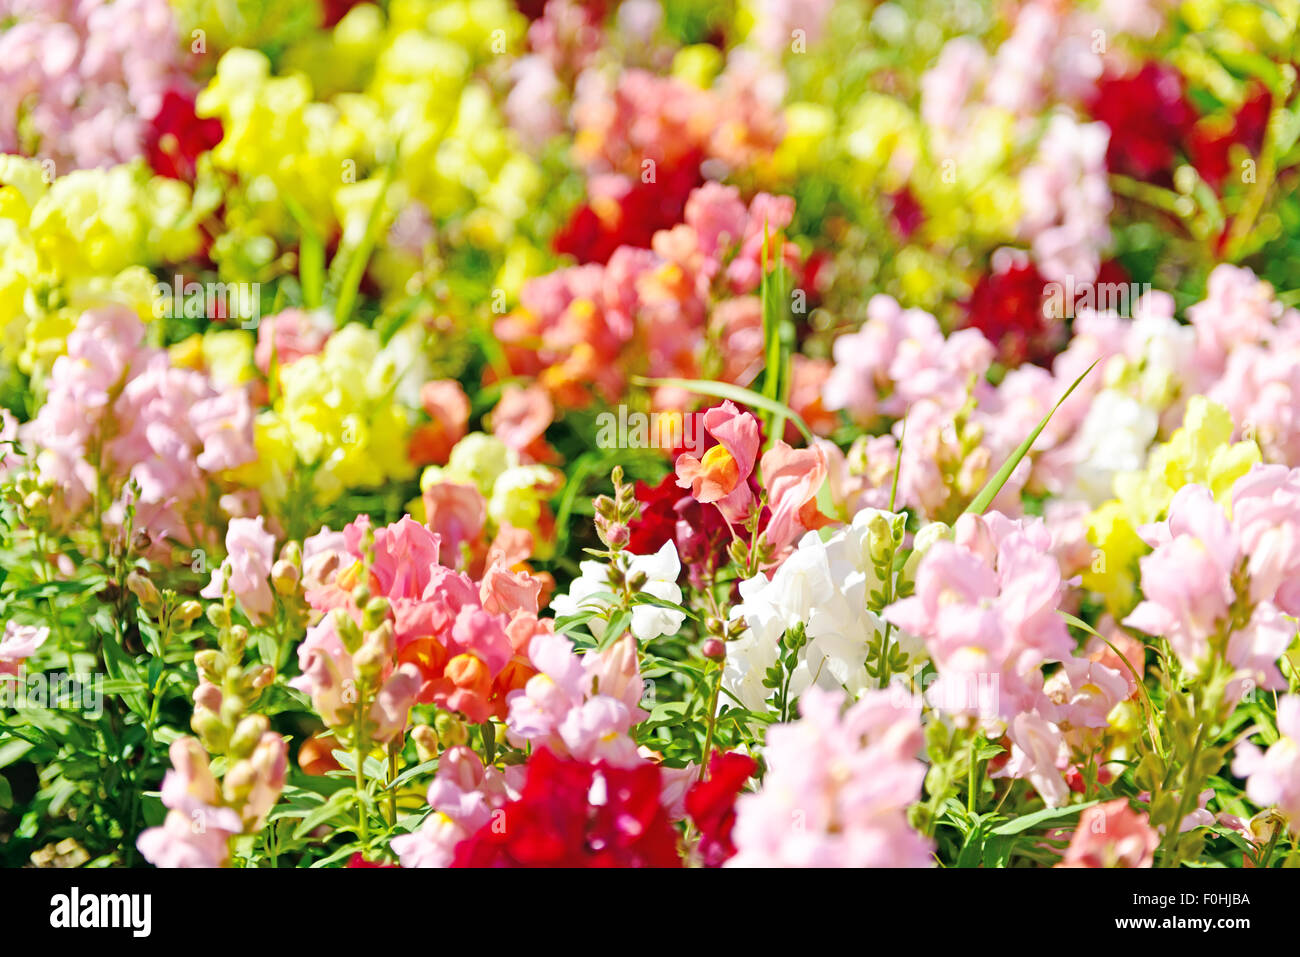 Meadow of flowers  at summer Stock Photo